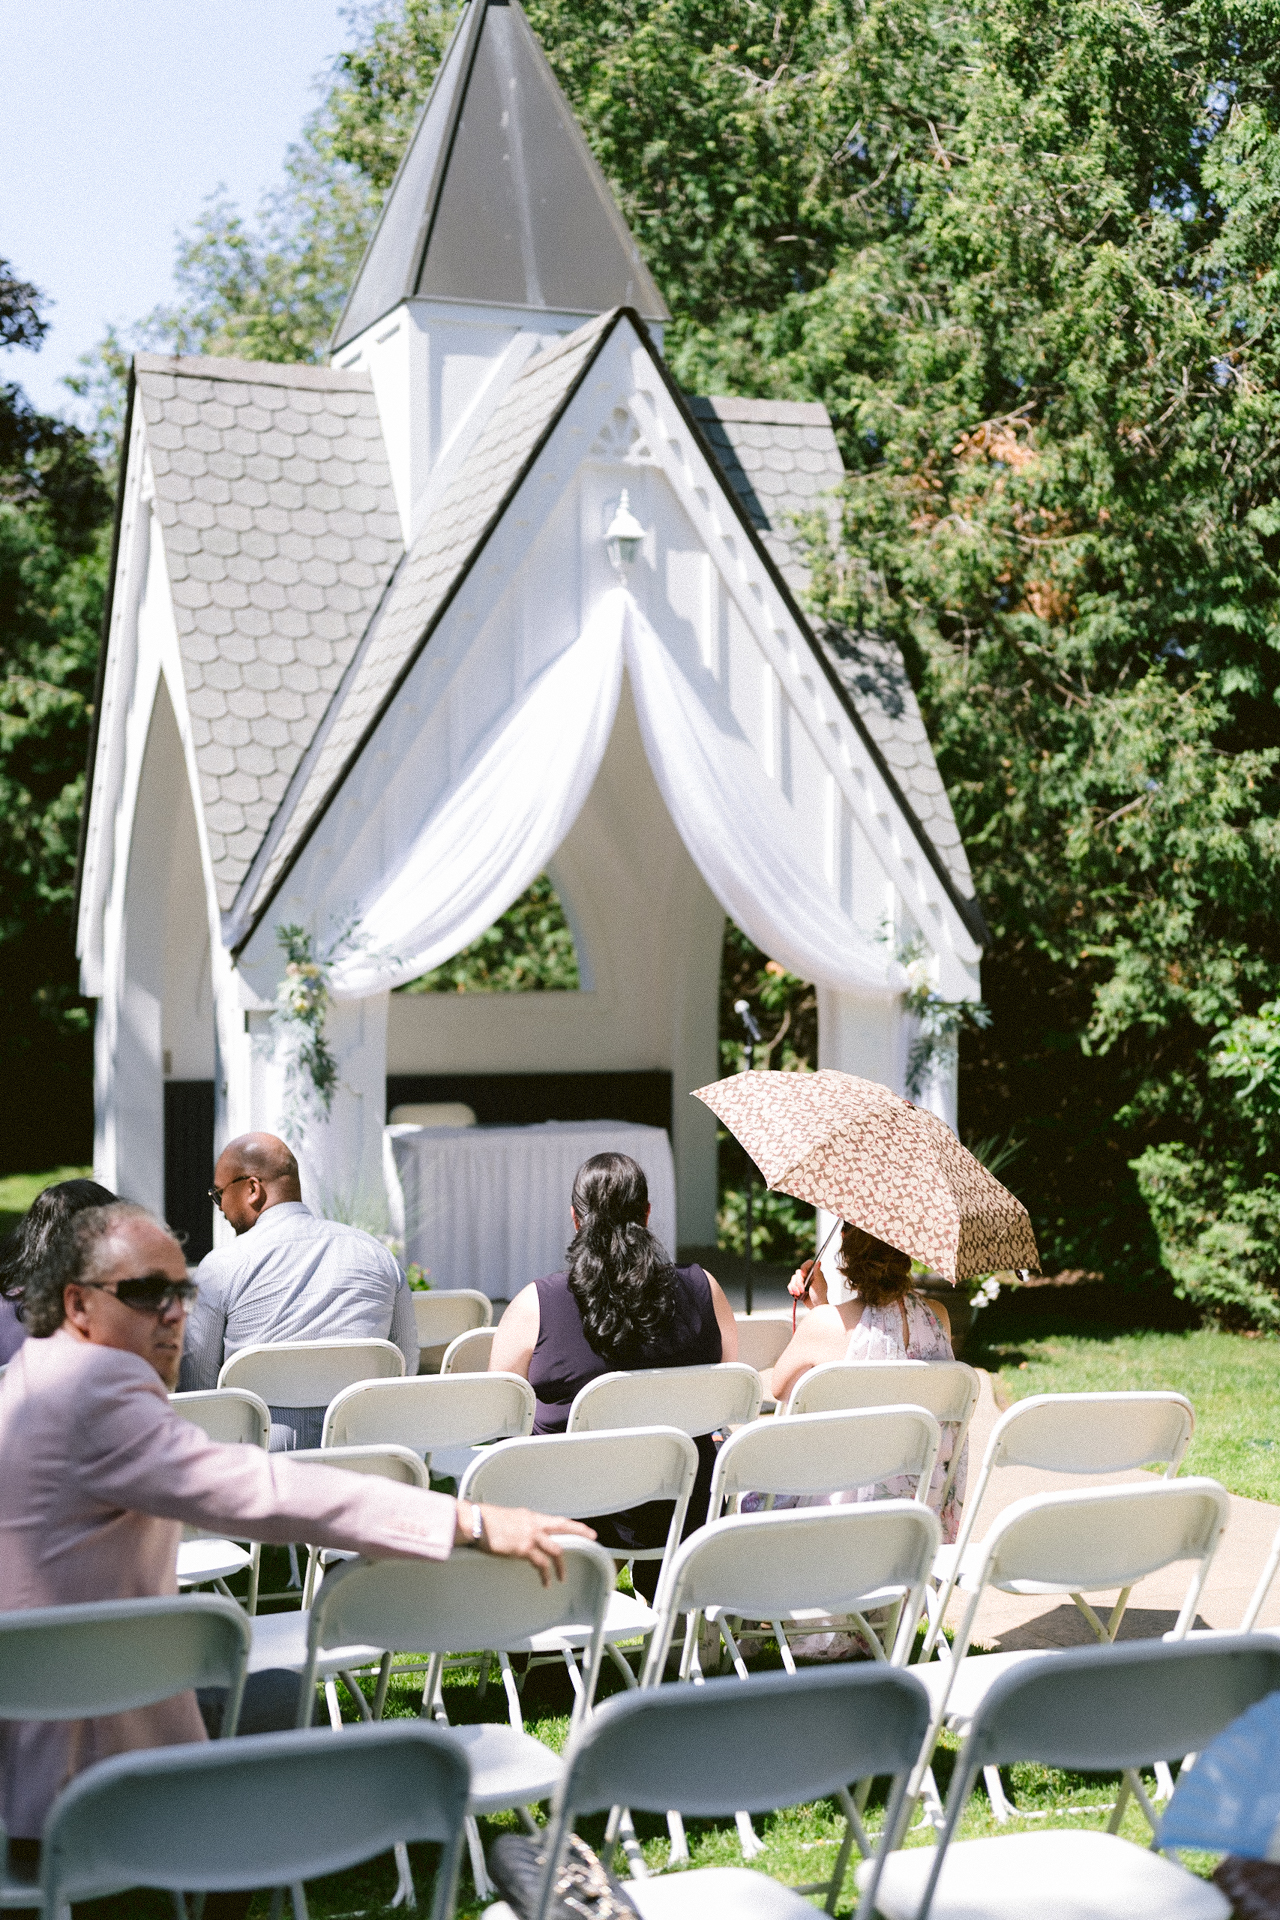 Guests seated at an outdoor wedding ceremony near a white gazebo on a sunny day.